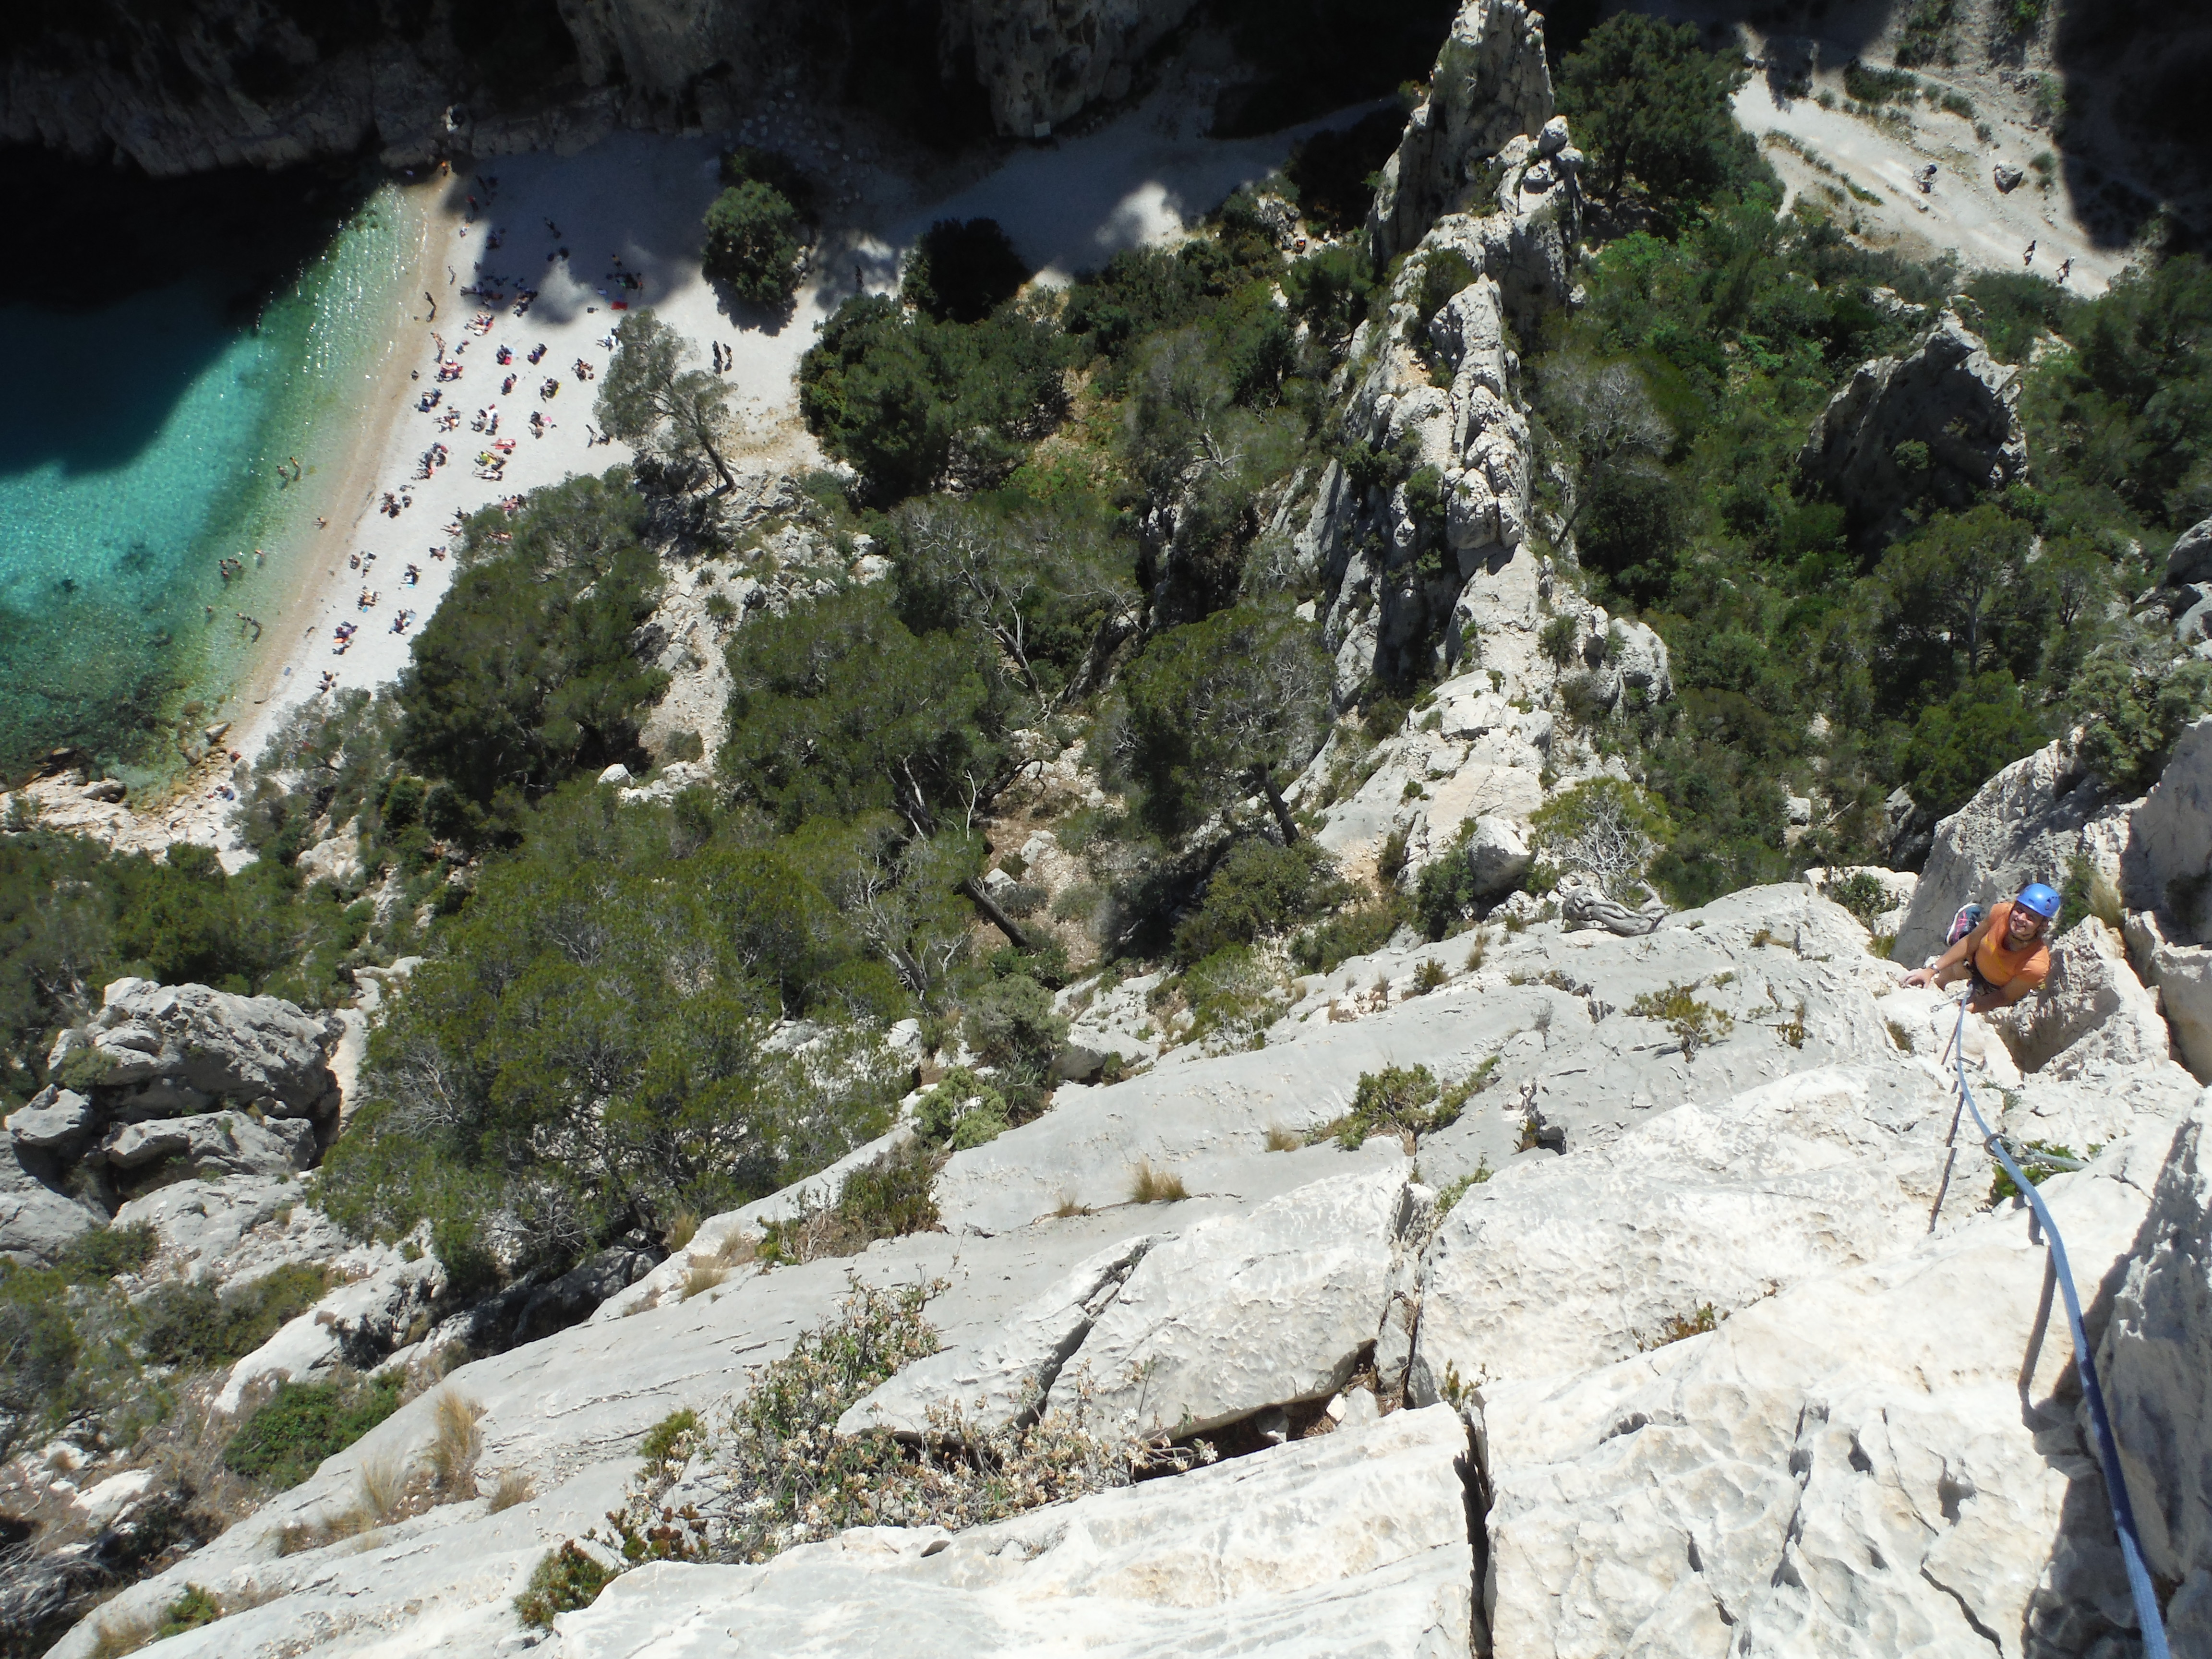 Climbing in the Calanques with the Med below...